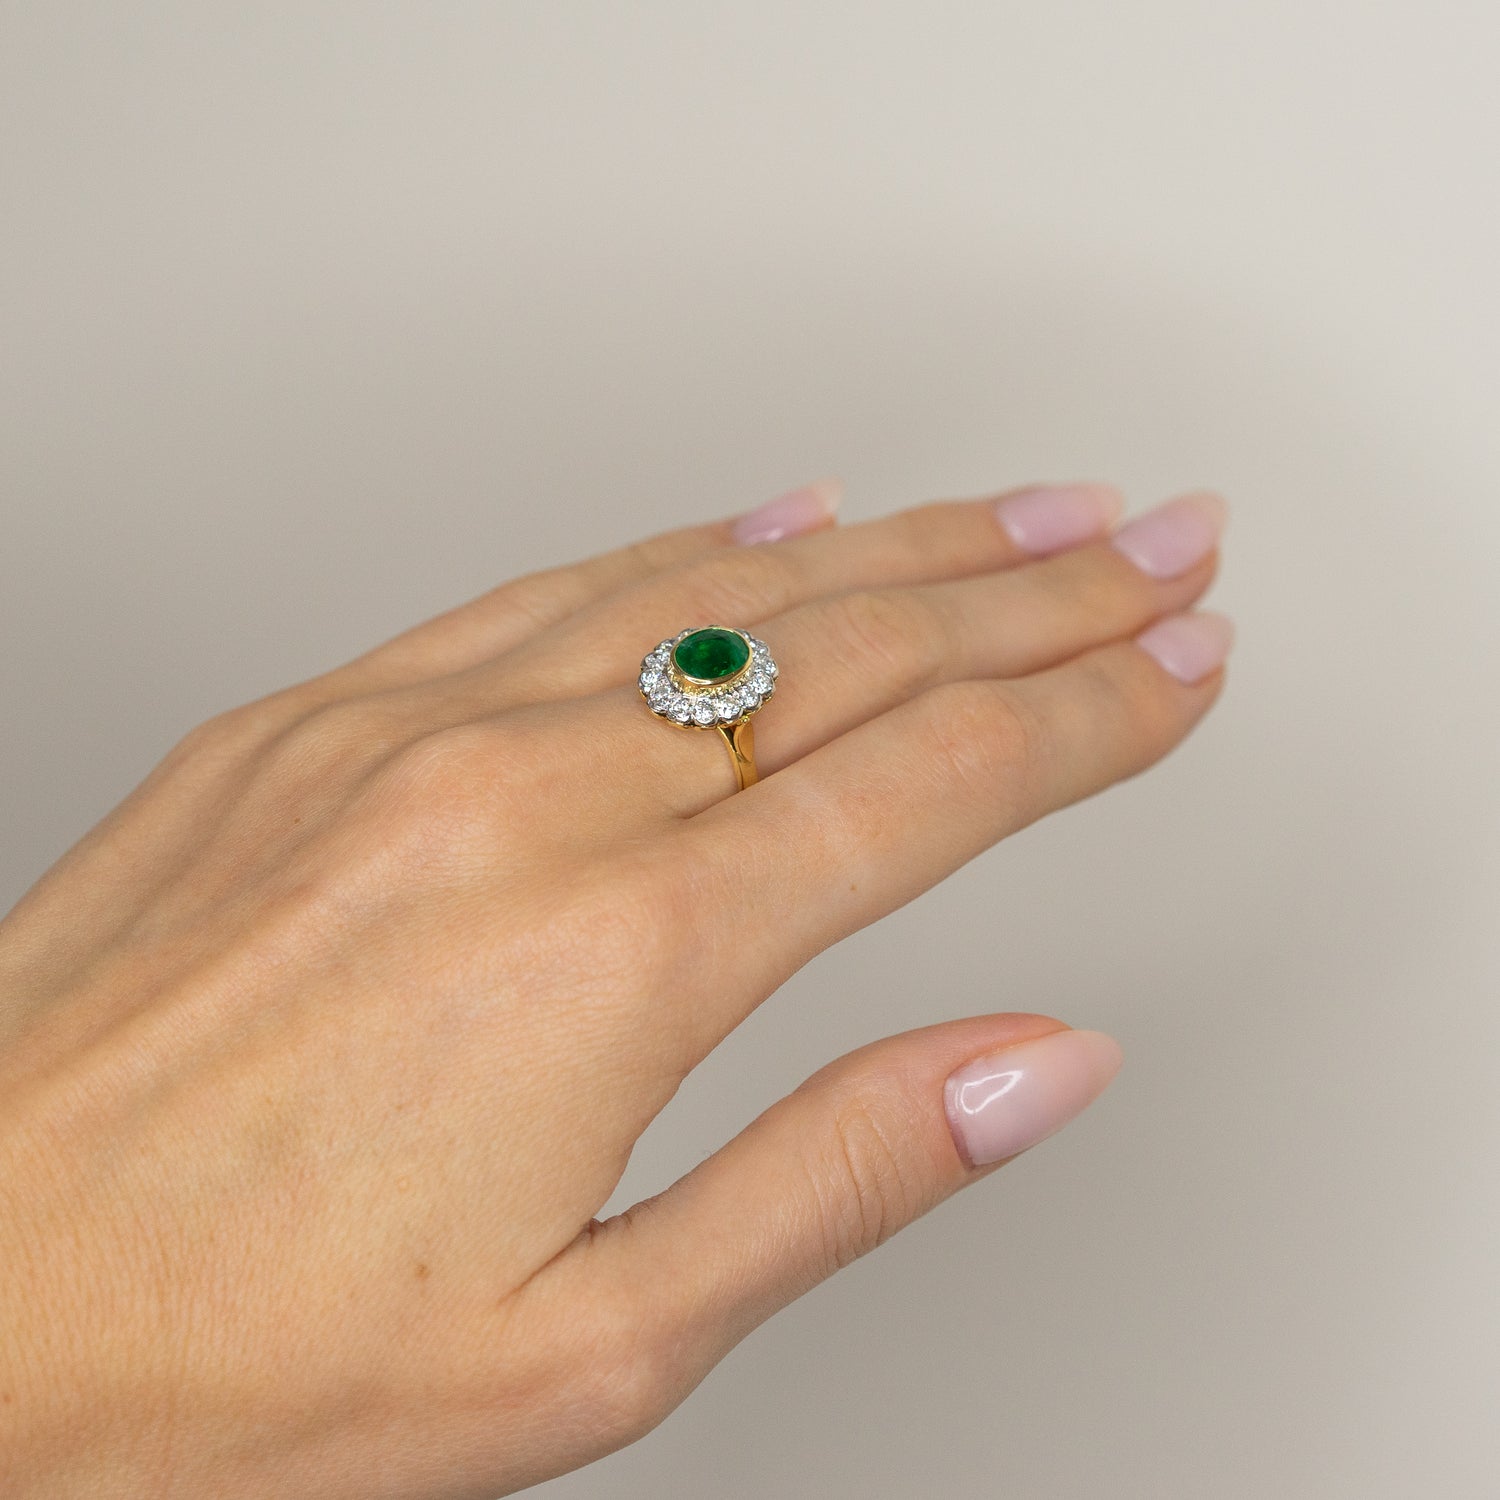 1.90ct Oval Emerald Ring with Bezel and Diamond Halo